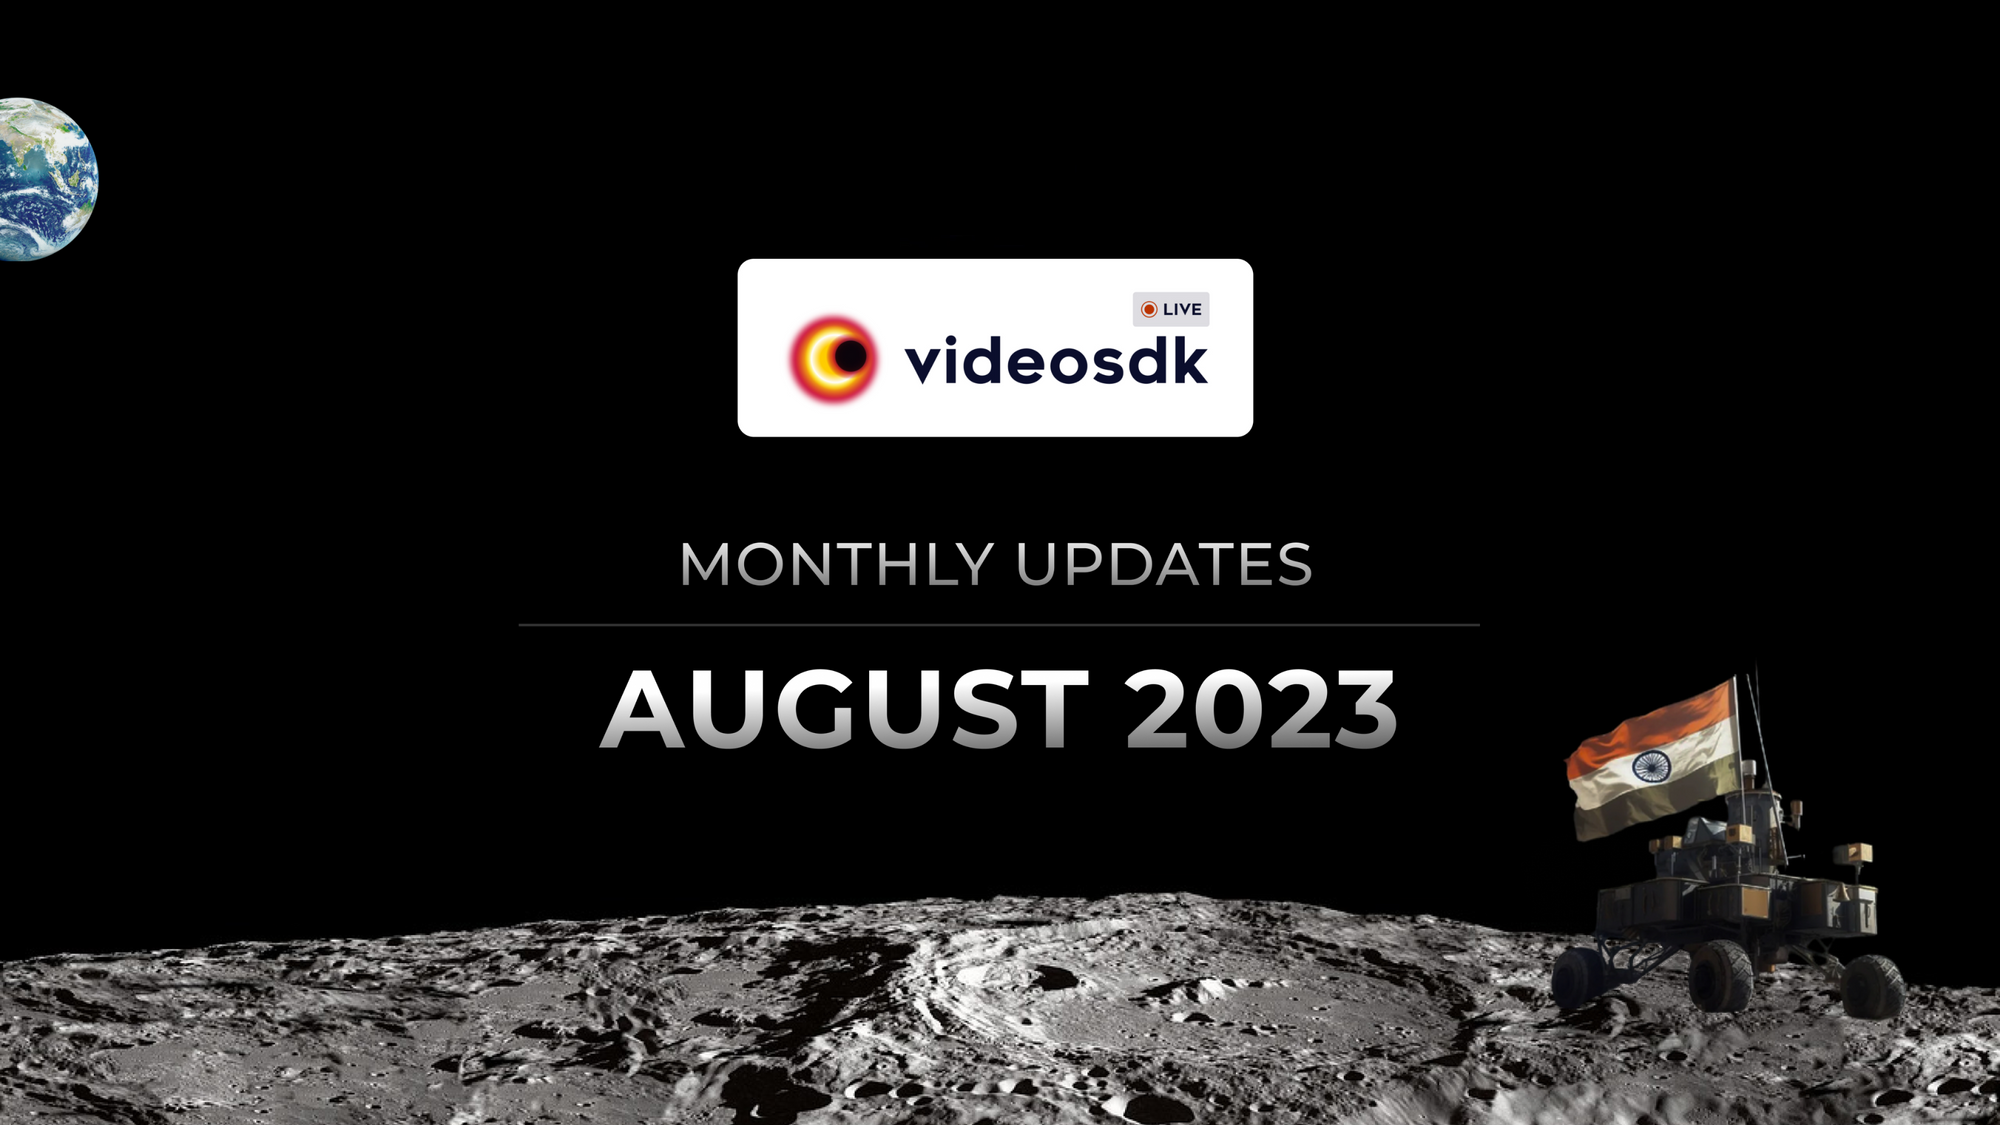 Video SDK Aug 23' Product Updates for Developers